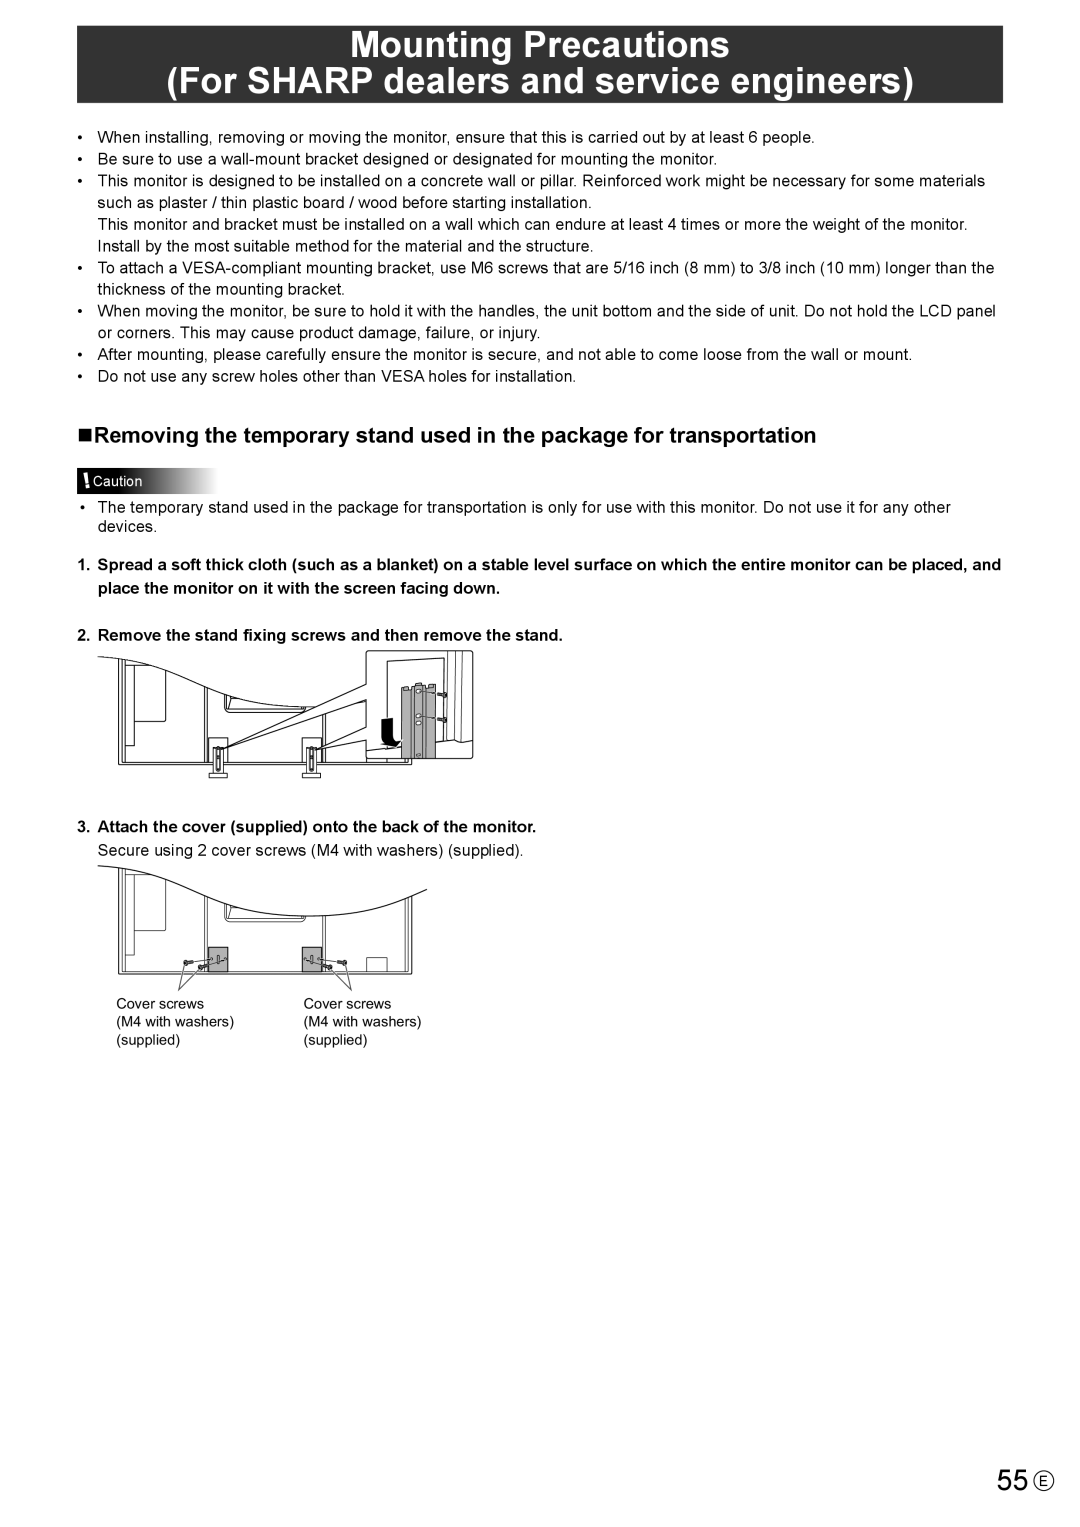 Sharp PNE802, PN-E802 operation manual 55 E, nRemoving the temporary stand used in the package for transportation 